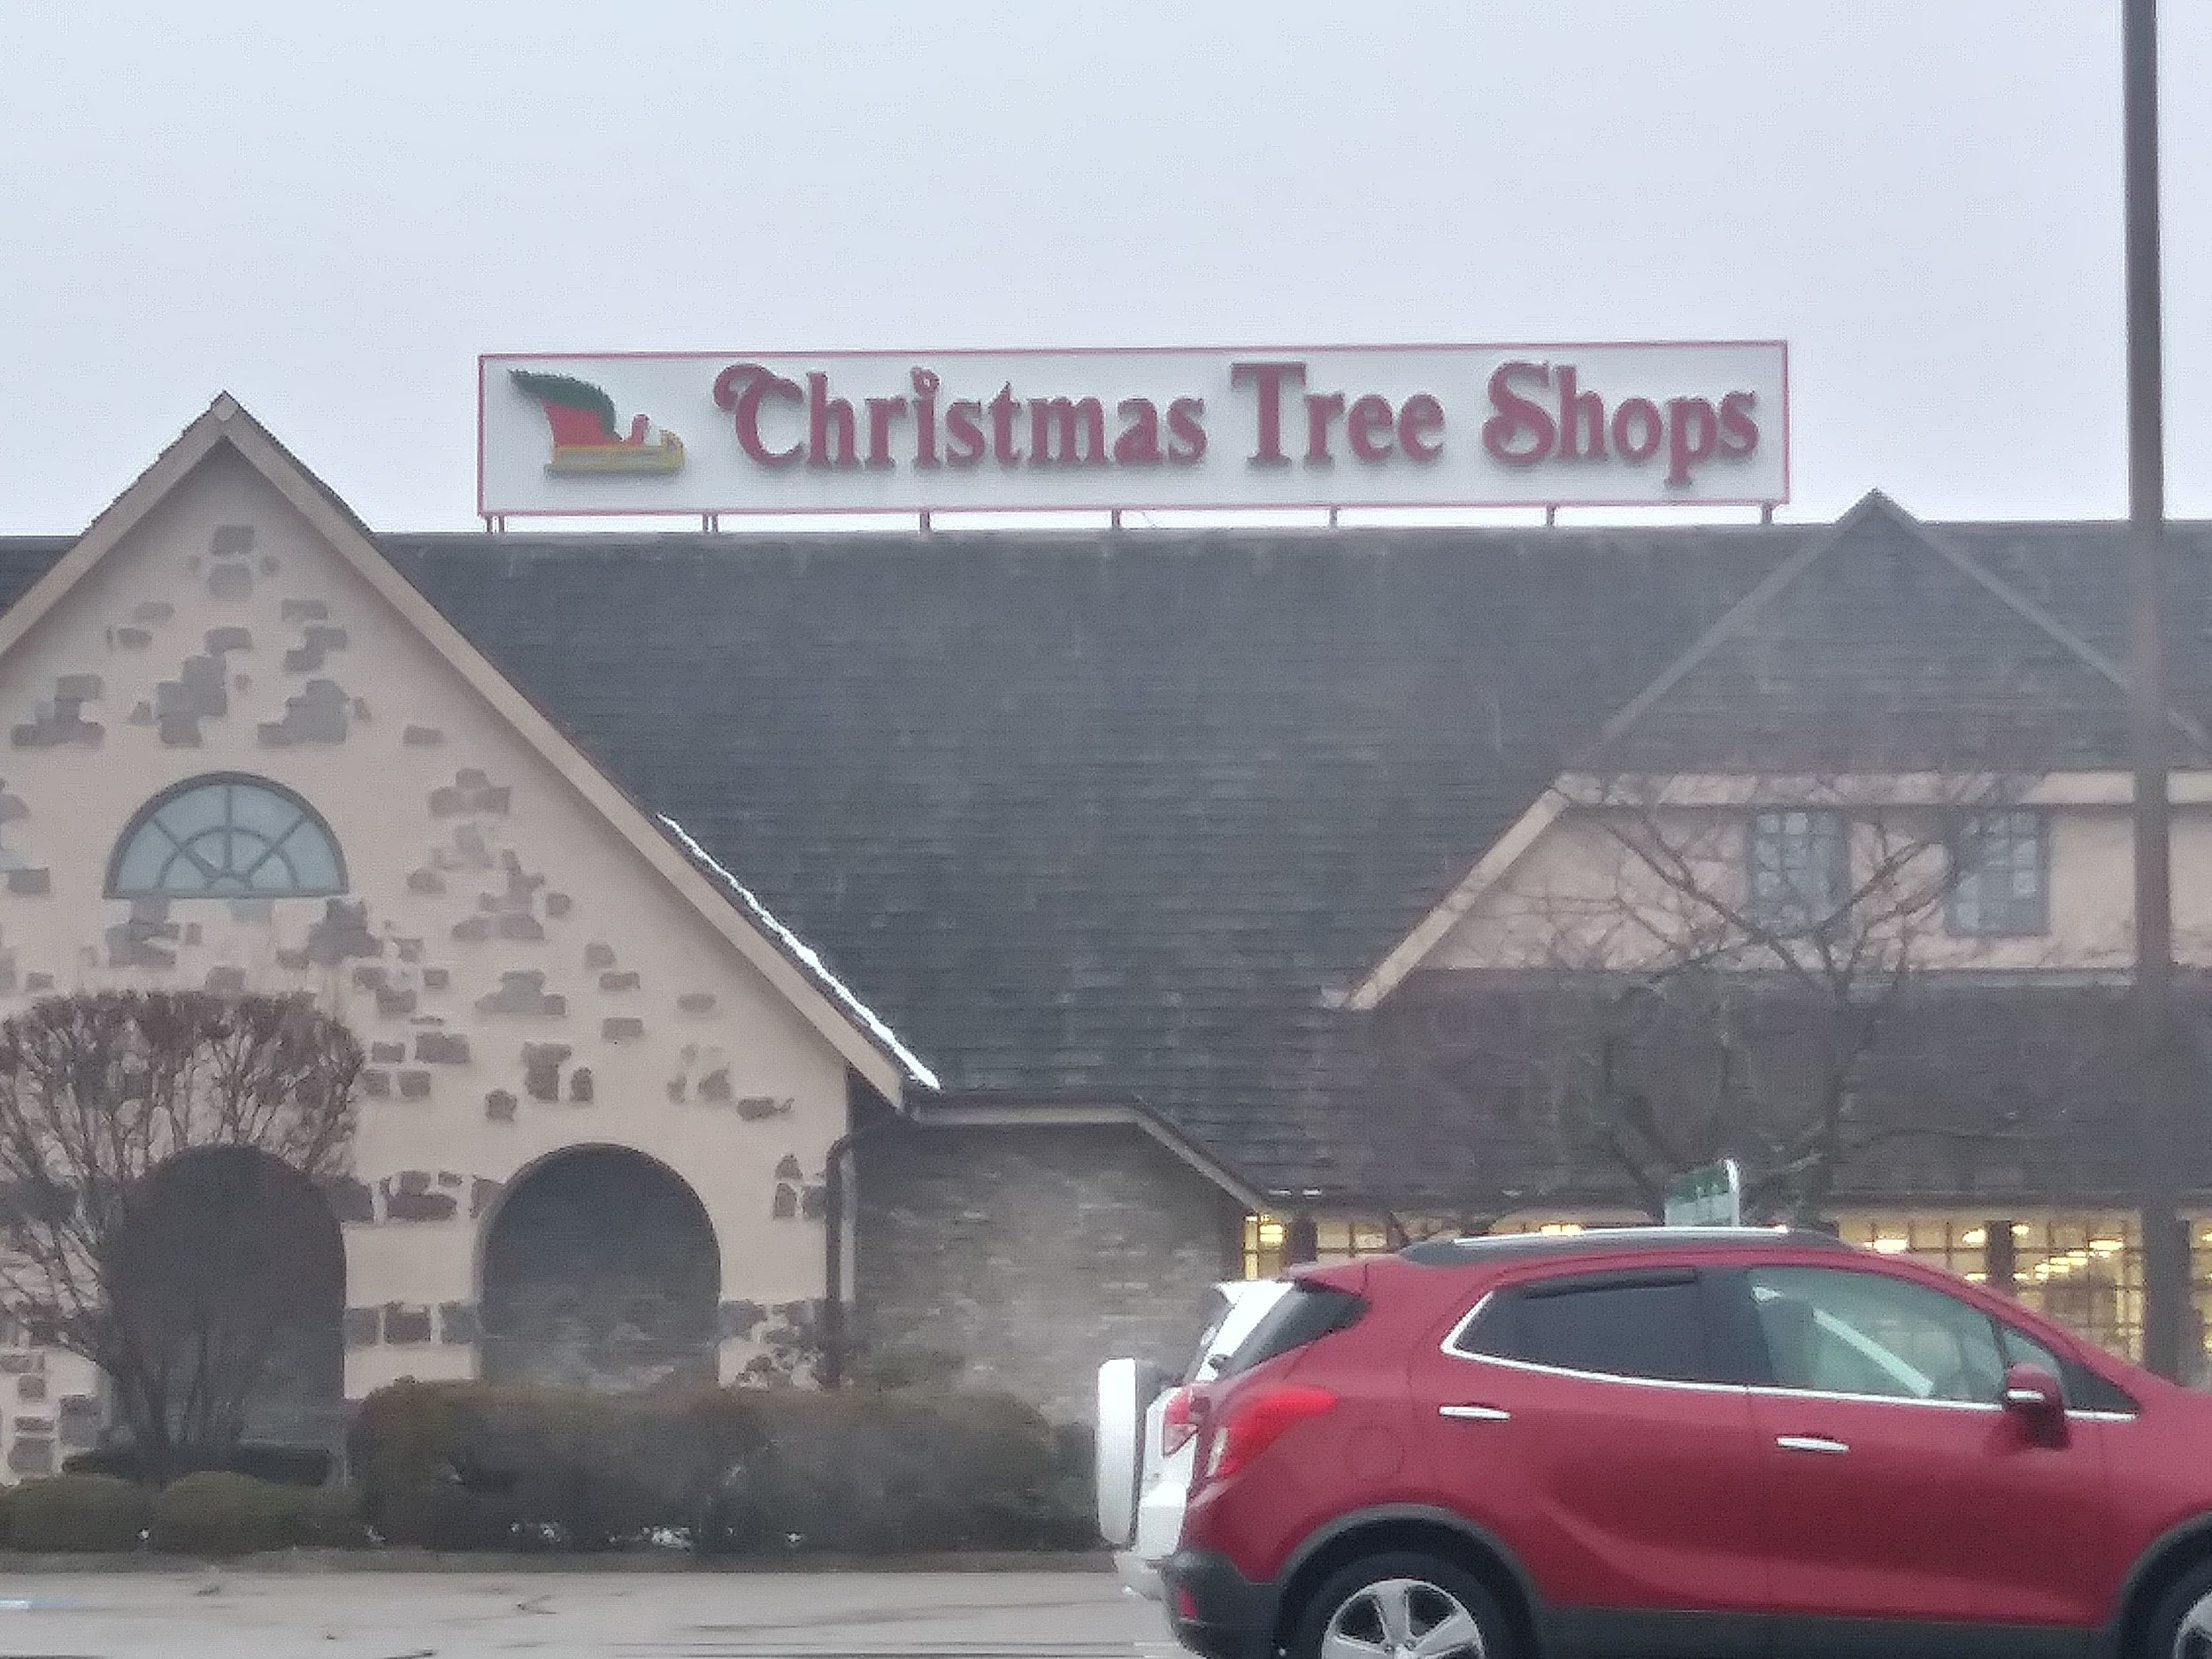 Cape Cods Famous Christmas Tree Shops Getting Name Change